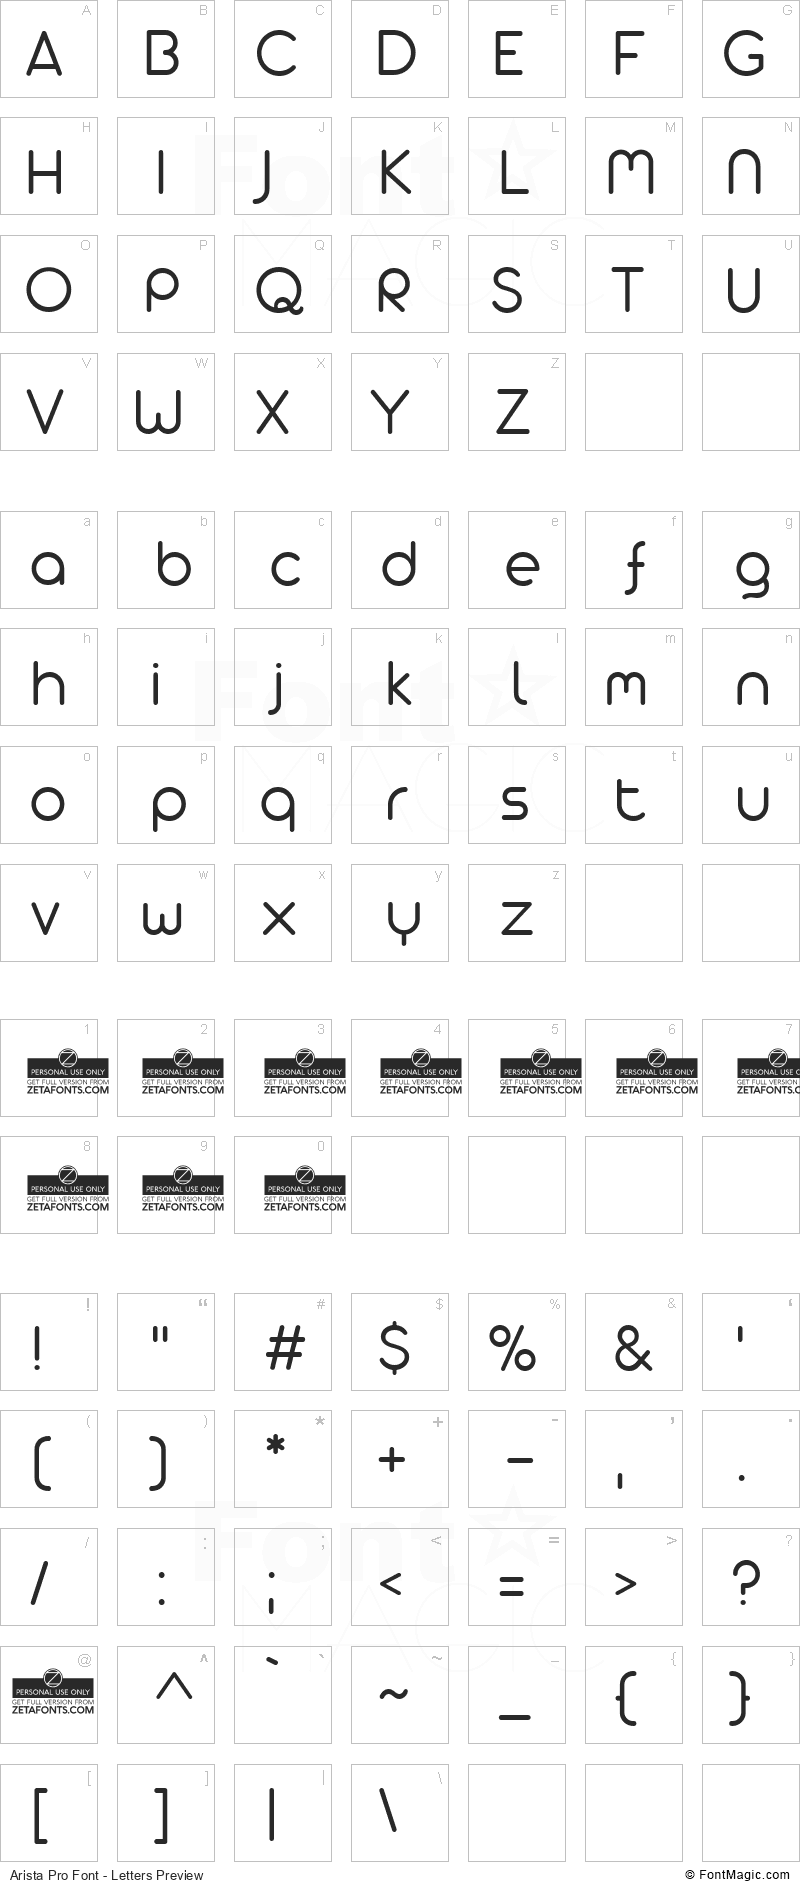 Arista Pro Font - All Latters Preview Chart